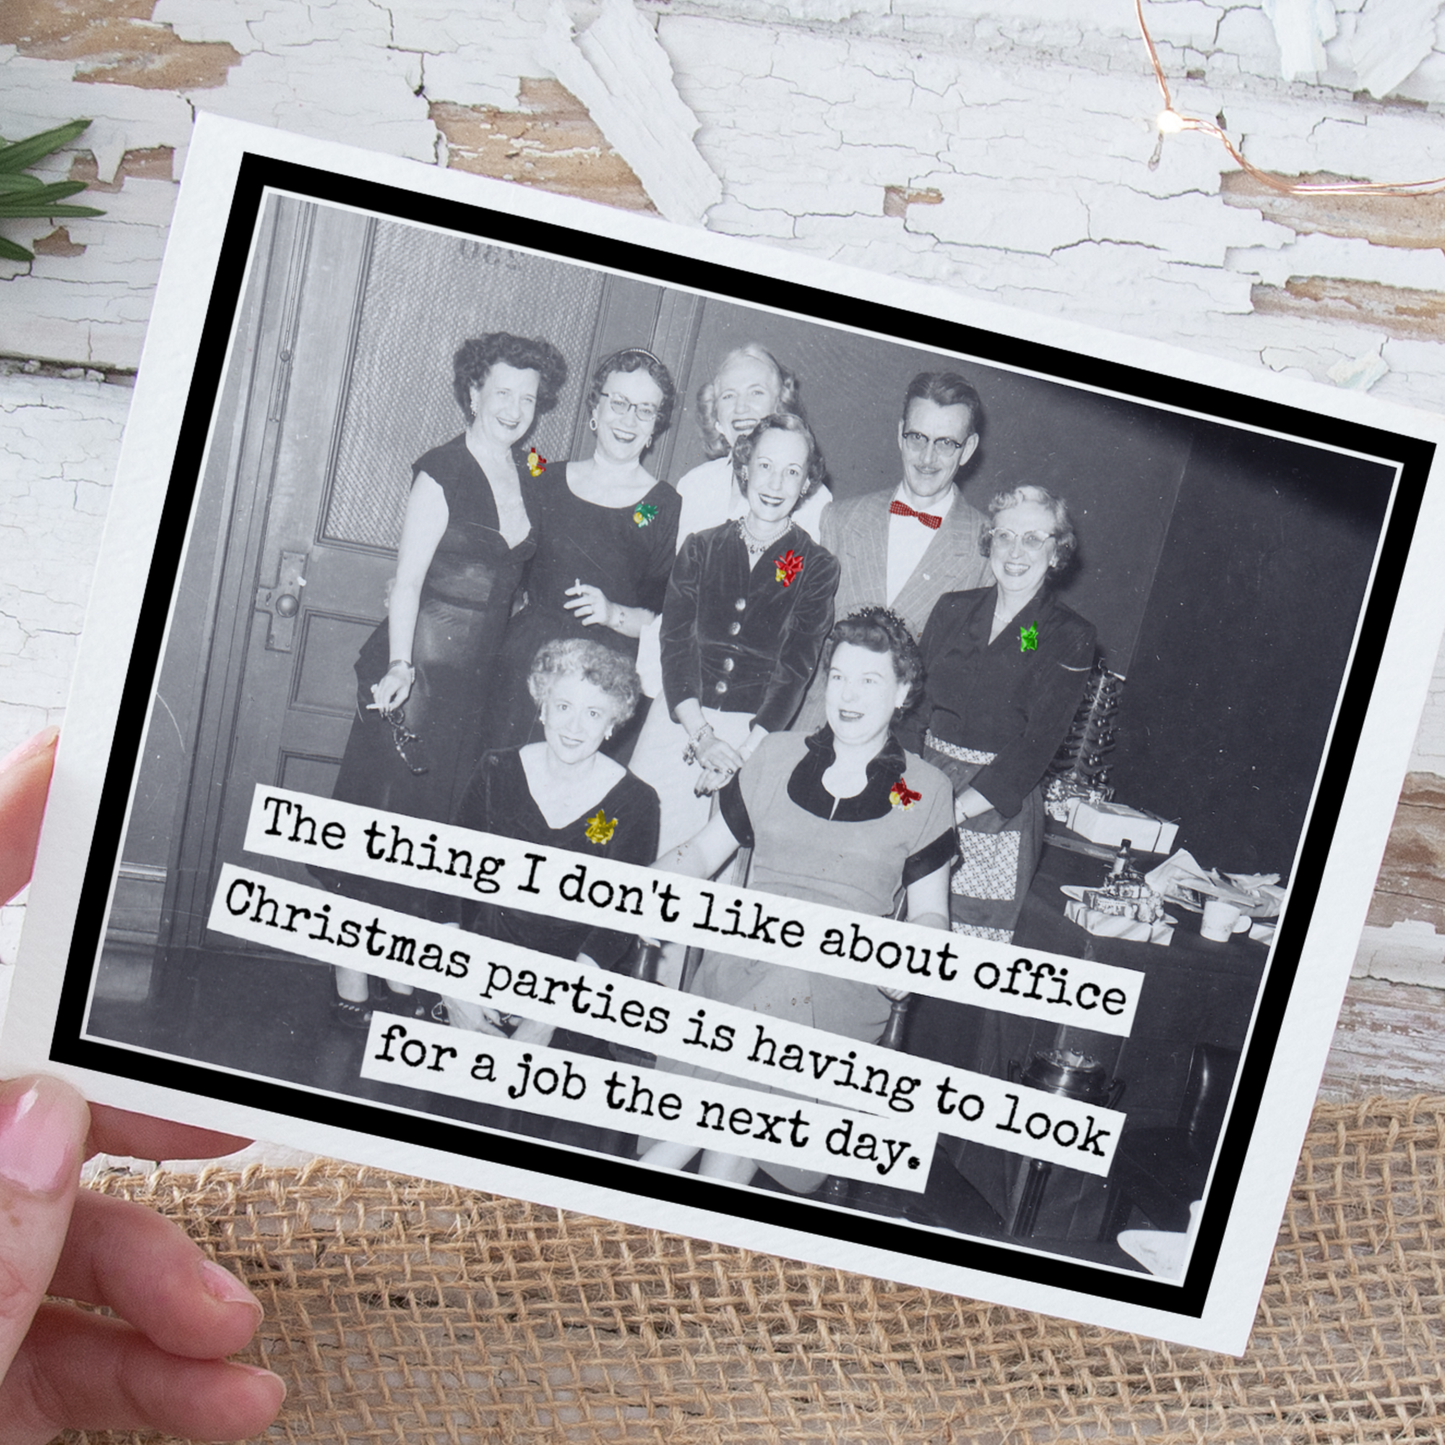 Raven's Rest Studio - Funny Christmas Card. Office Christmas Parties.